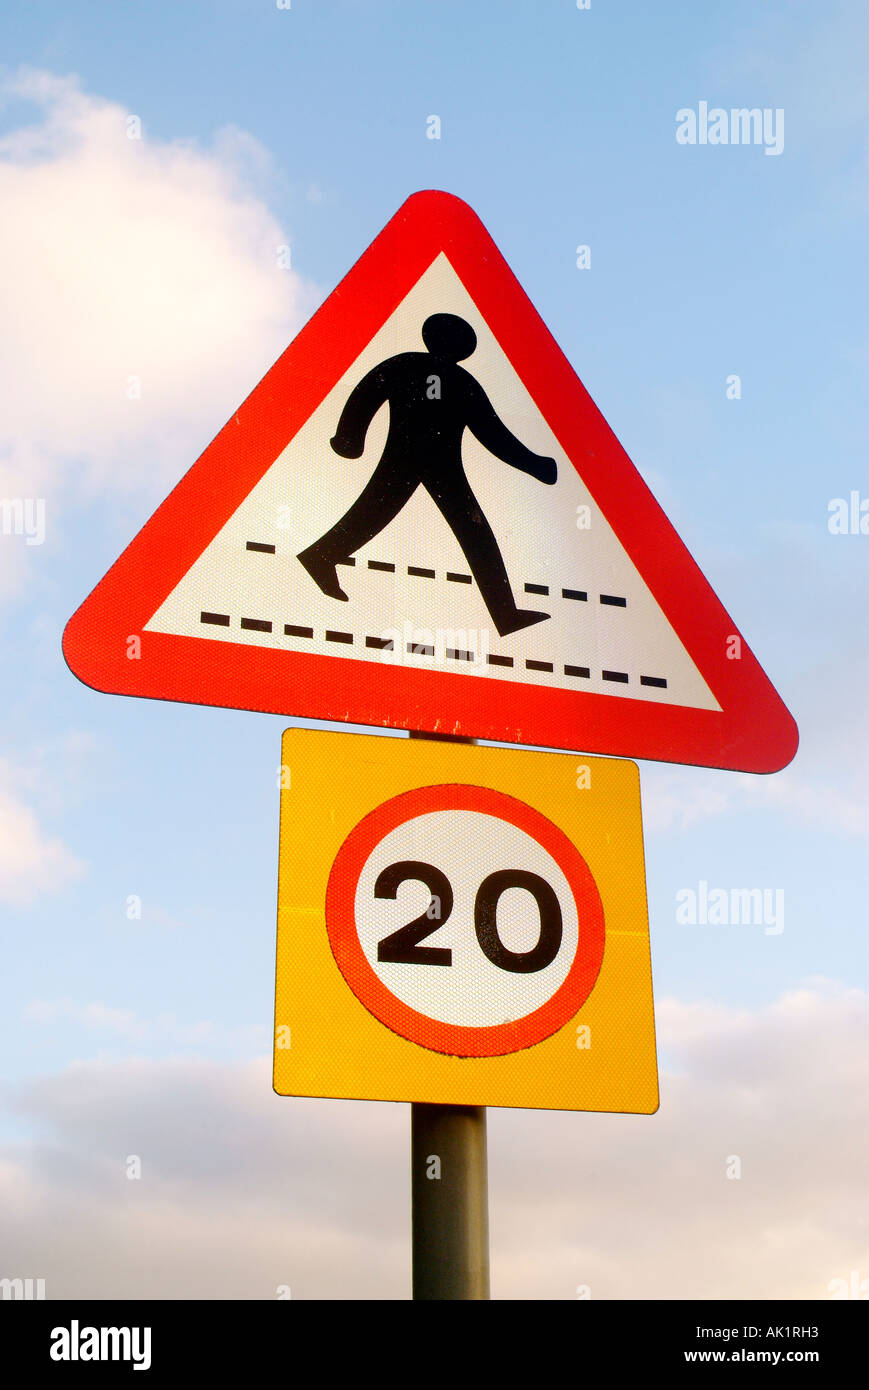 A road sign warning against pedestrians walking on crossings limits speed of vehicles to 20mph Miles Per Hour Stock Photo